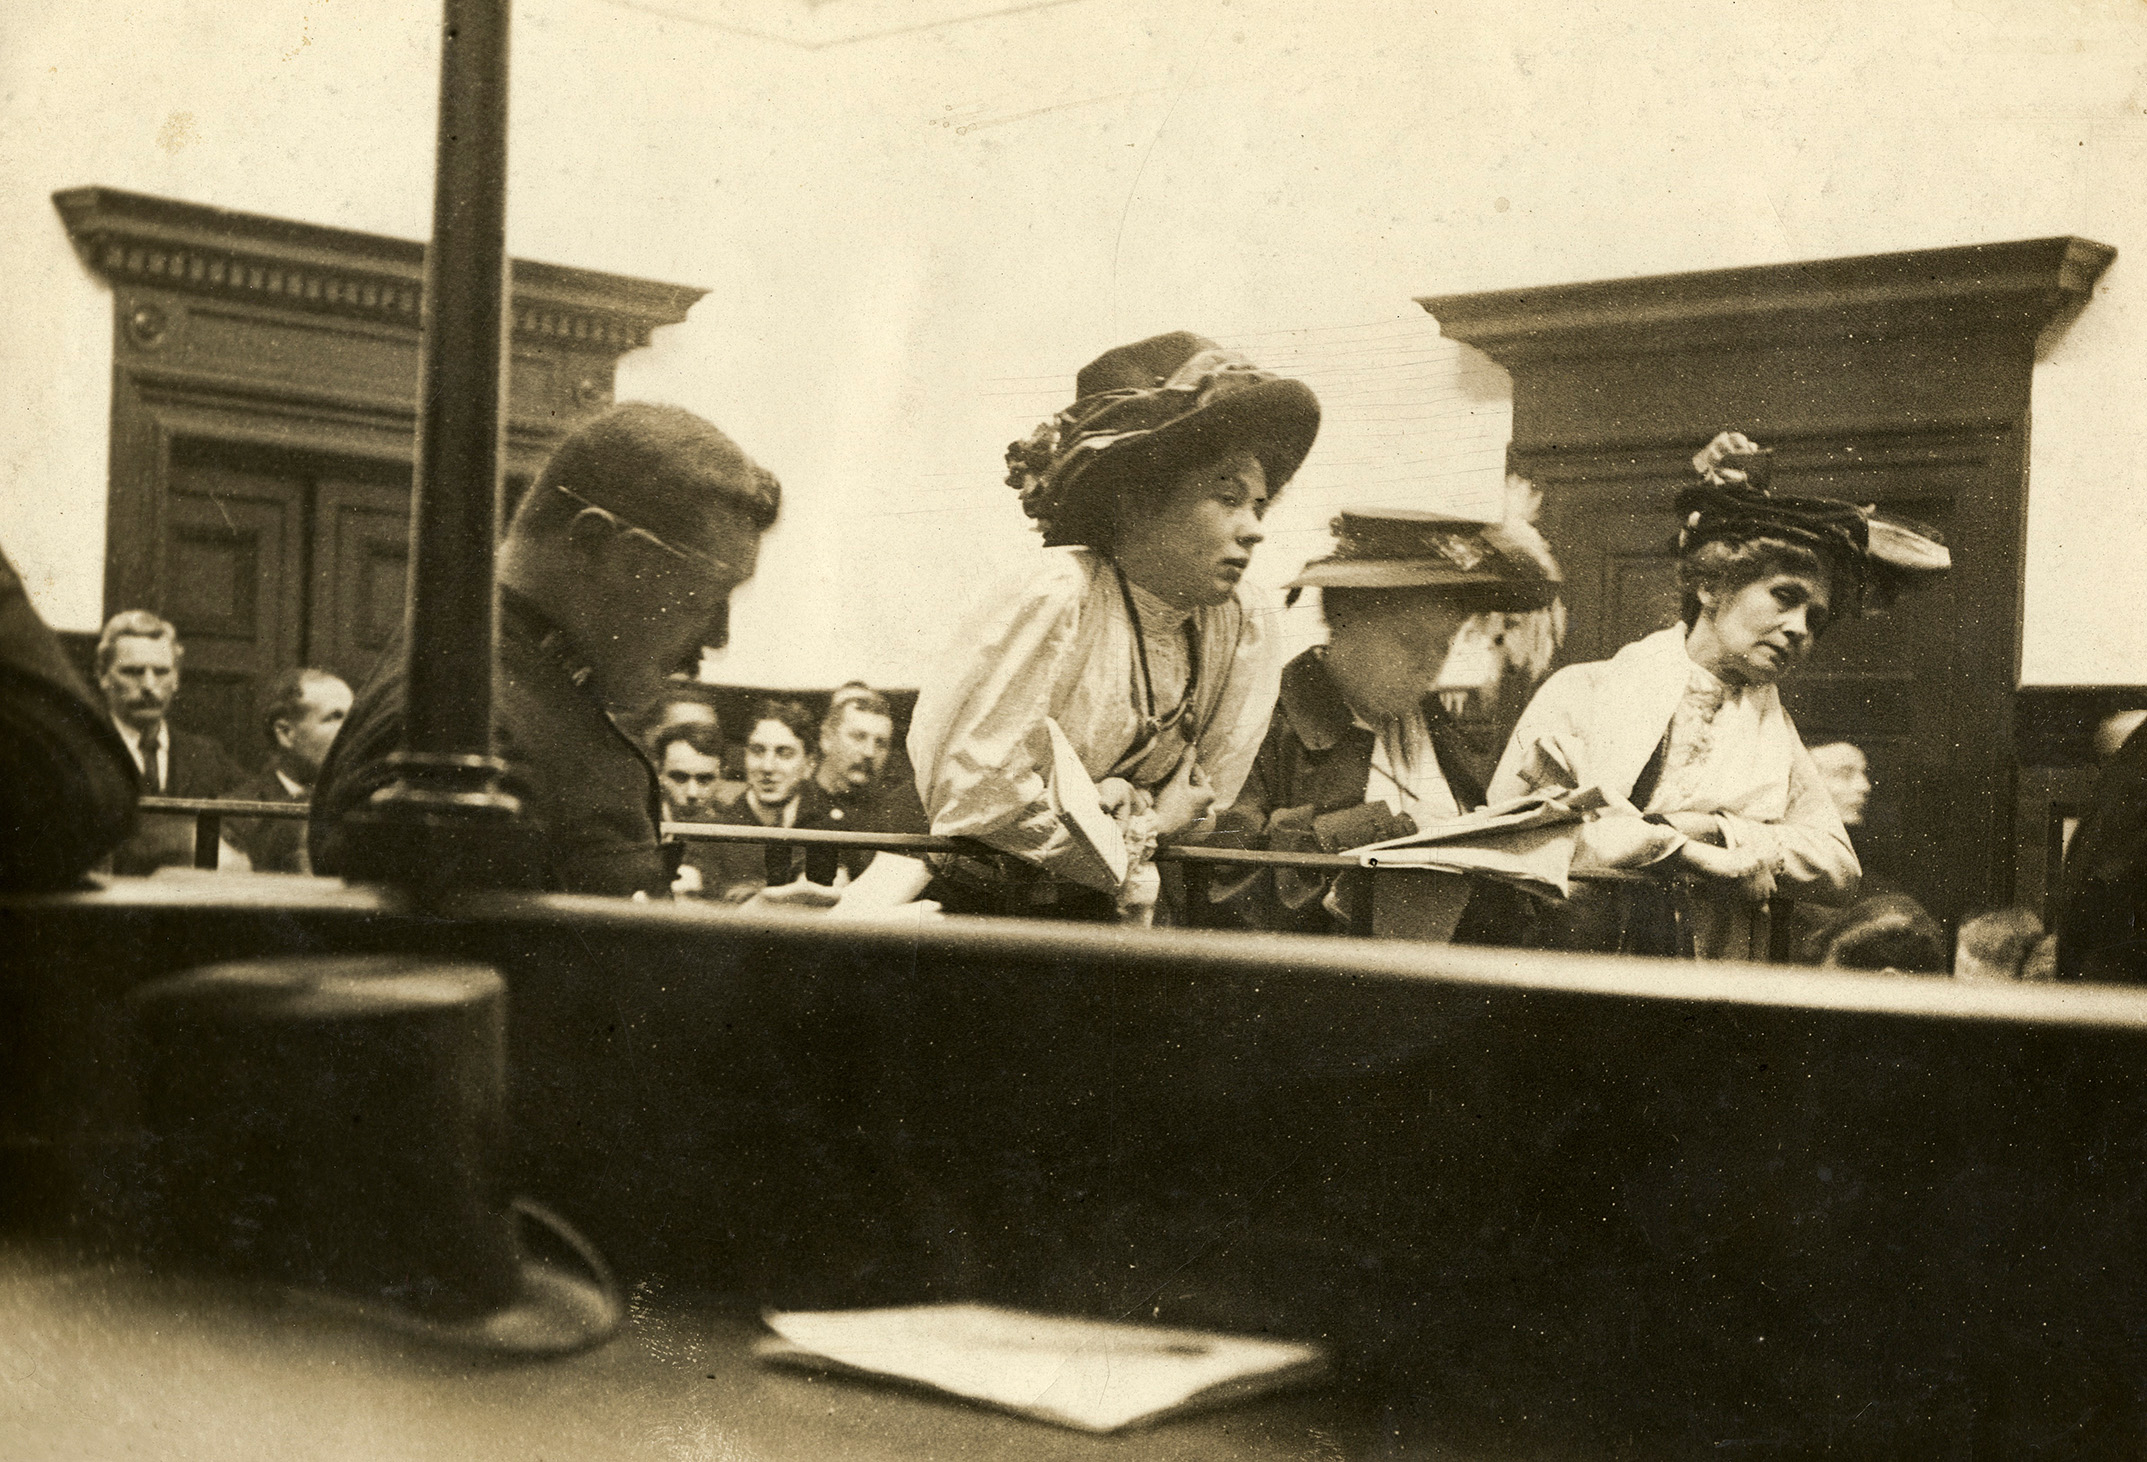 Suffragettes in the dock at Bow Street Court, London. Some of the best-known trials of suffragettes took place at Bow Street Court in the decade before the First World War. Most of the offences by Women’s Social and Political Union (WSPU) members were low-level so would be tried in London’s magistrates’ courts, including Bow Street. In 1908 the WSPU produced a leaflet that urged readers to ‘help the suffragettes to rush the House of Commons’ on 13 October. Its leaders, Emmeline Pankhurst, Christabel Pankhurst and Flora Drummond, were arrested and tried at Bow Street. A press photographer known to the WSPU took covert pictures of the trial showing the three defendants in the dock.